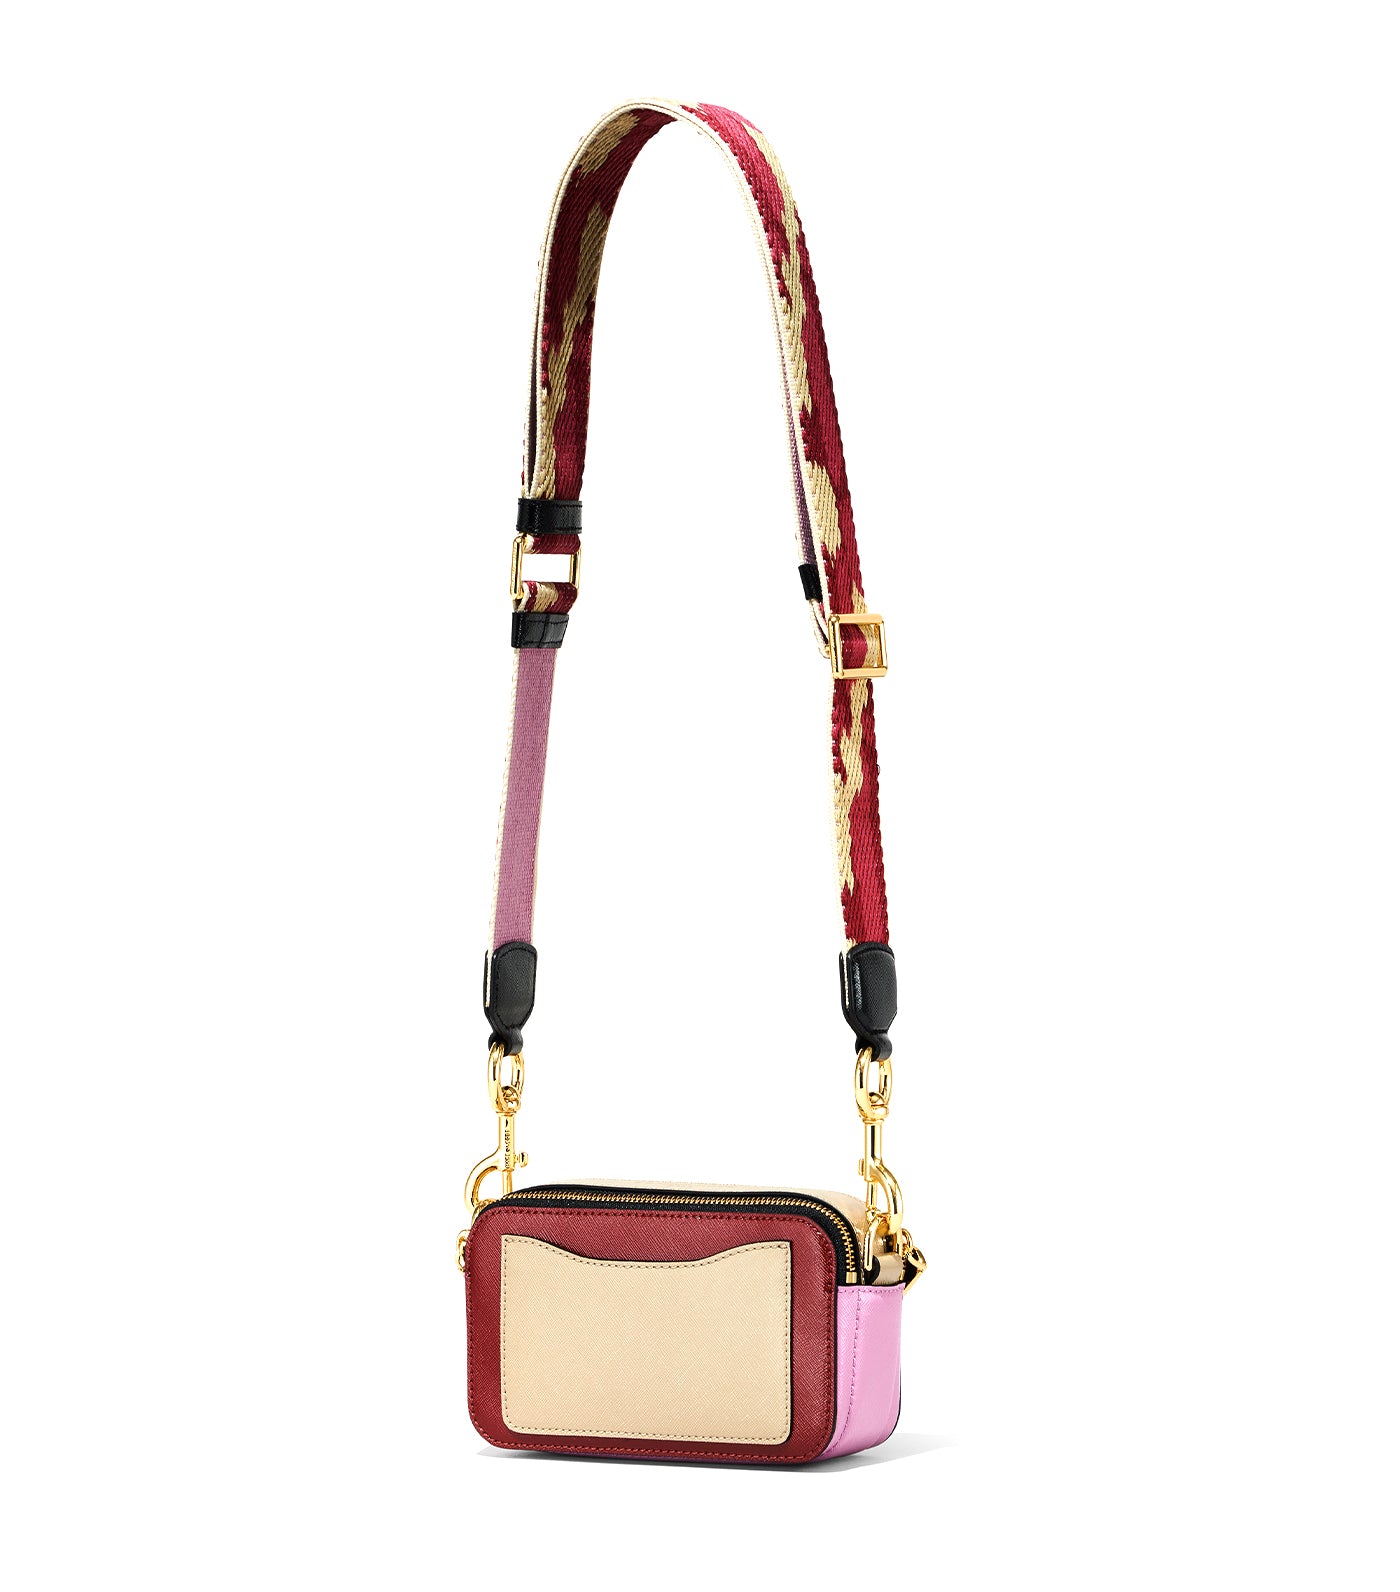 THE Snapshot Small Camera Bag Marc Jacobs in Dragon Fruit Multi